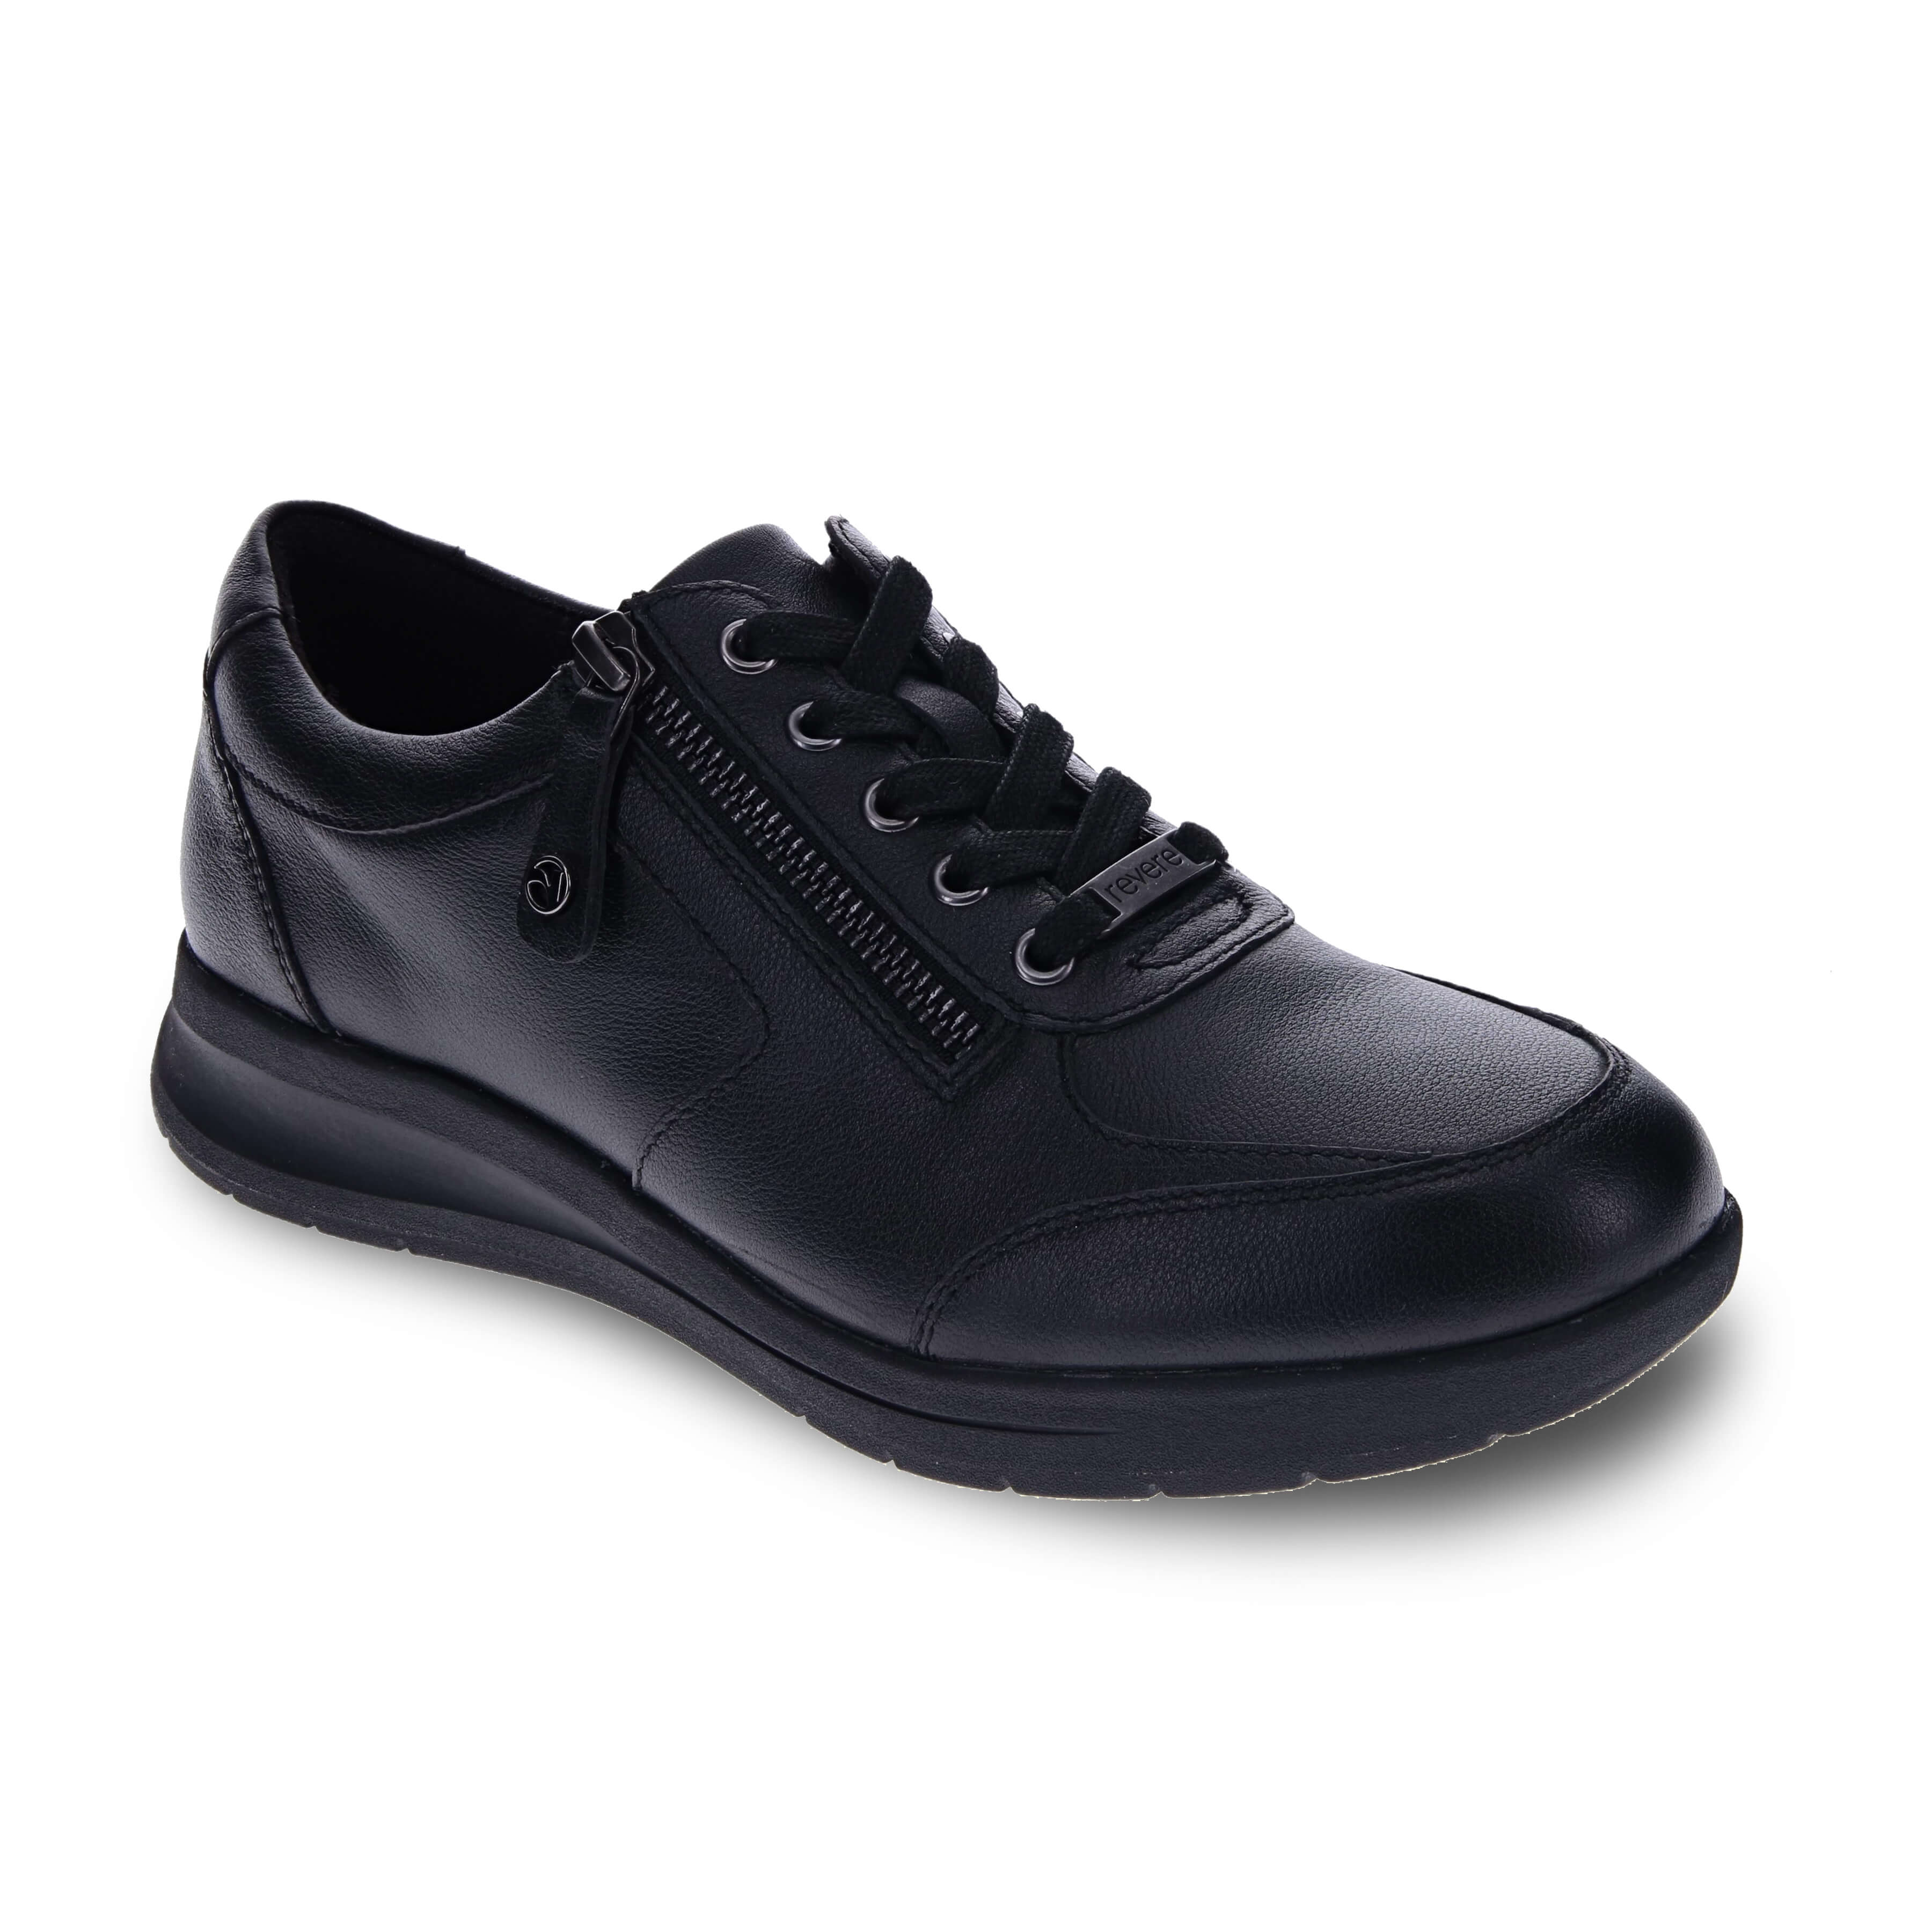 Buy pure leather shoes under 1000 in India @ Limeroad